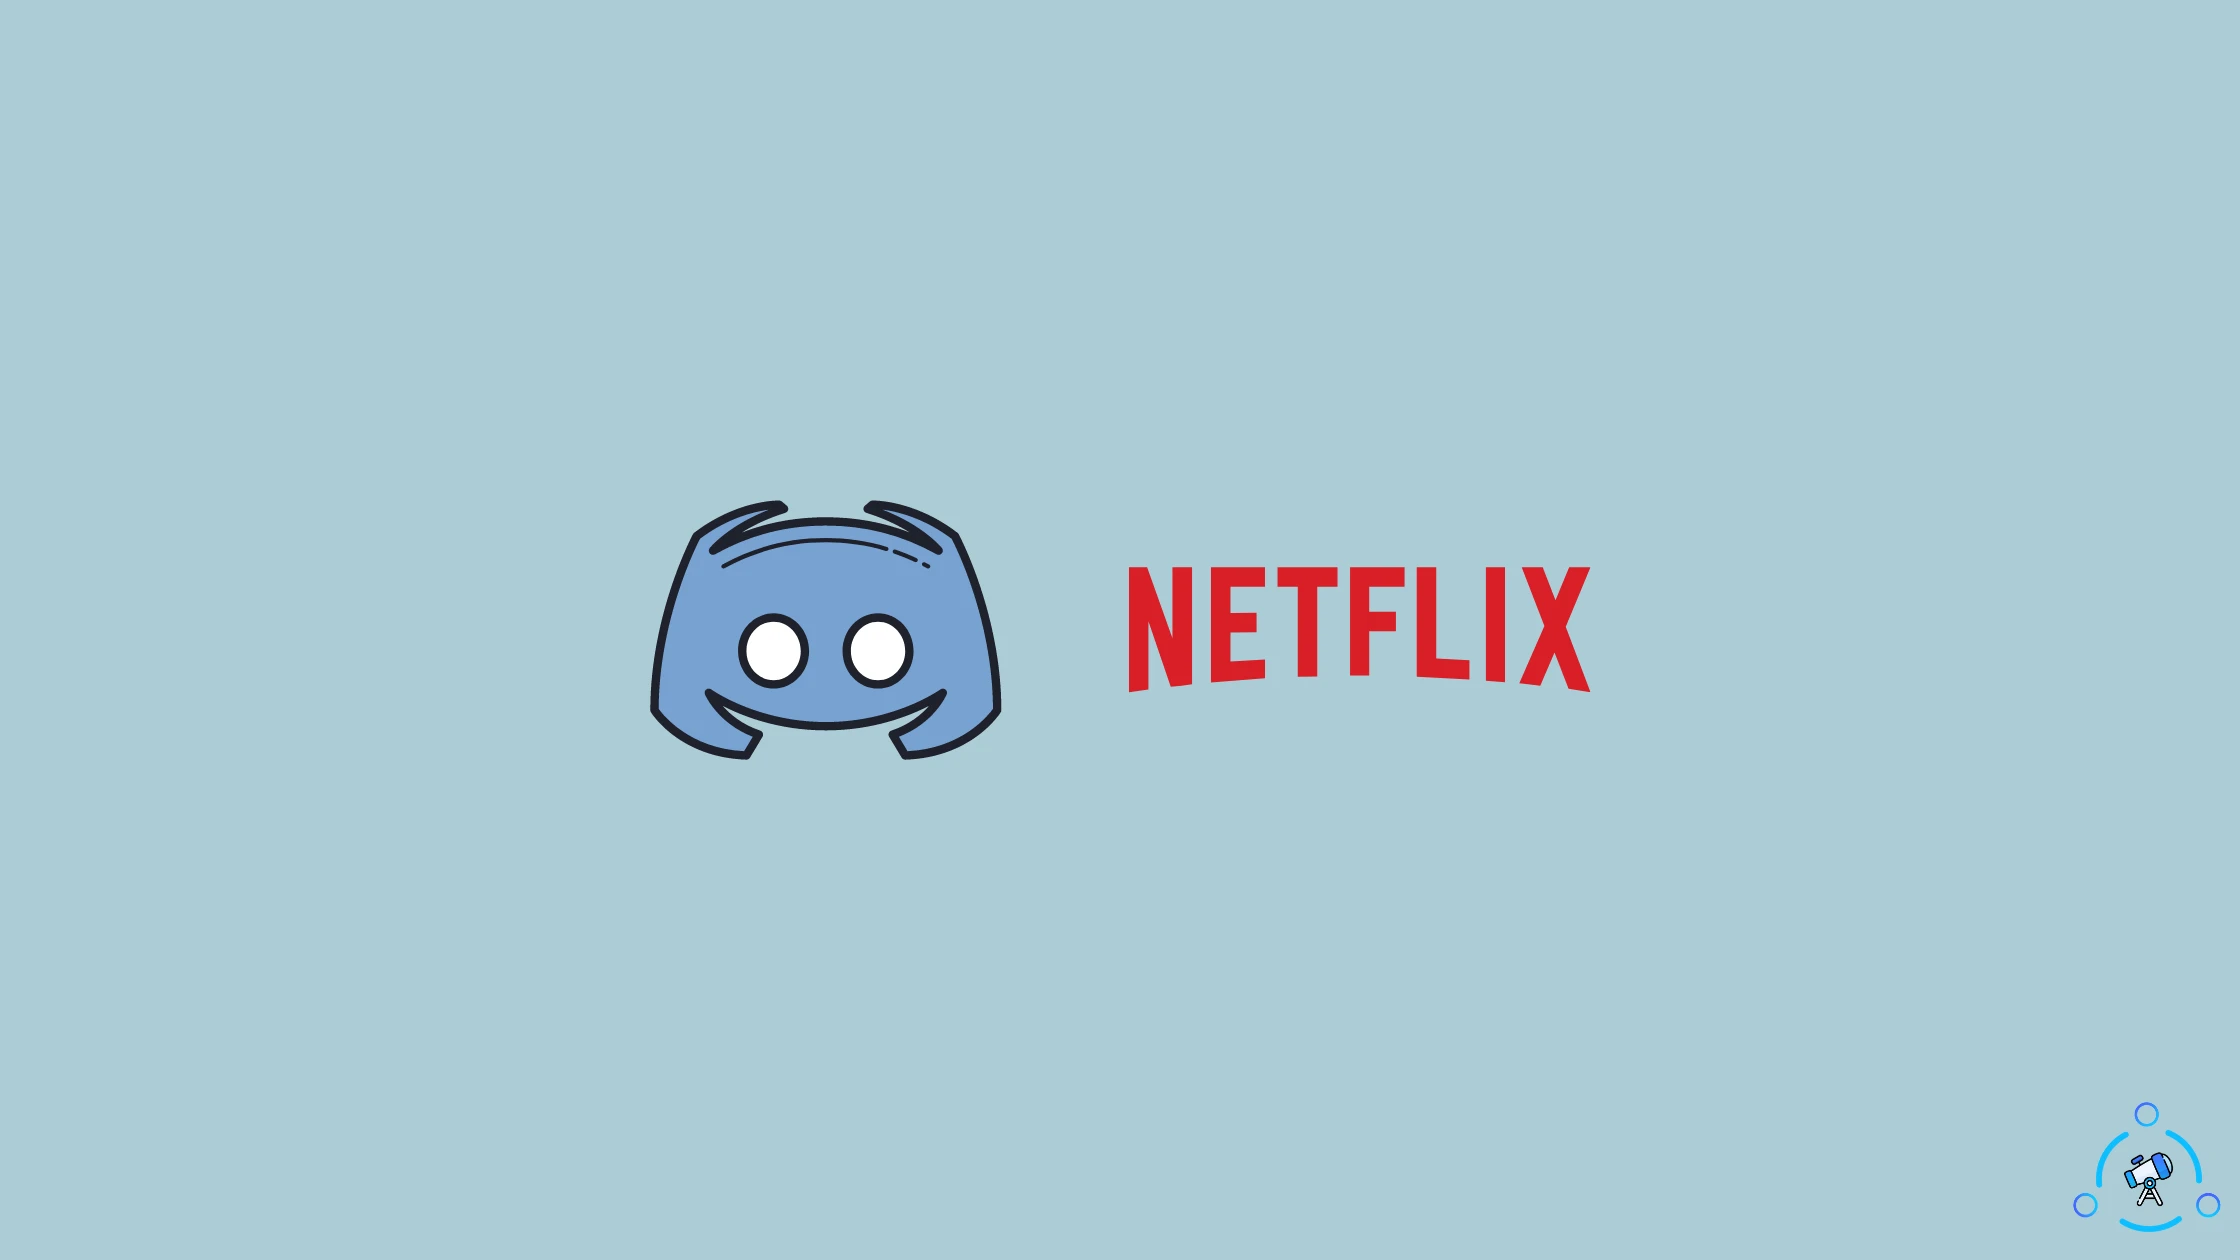 How to Screen Share Netflix on Discord 2022